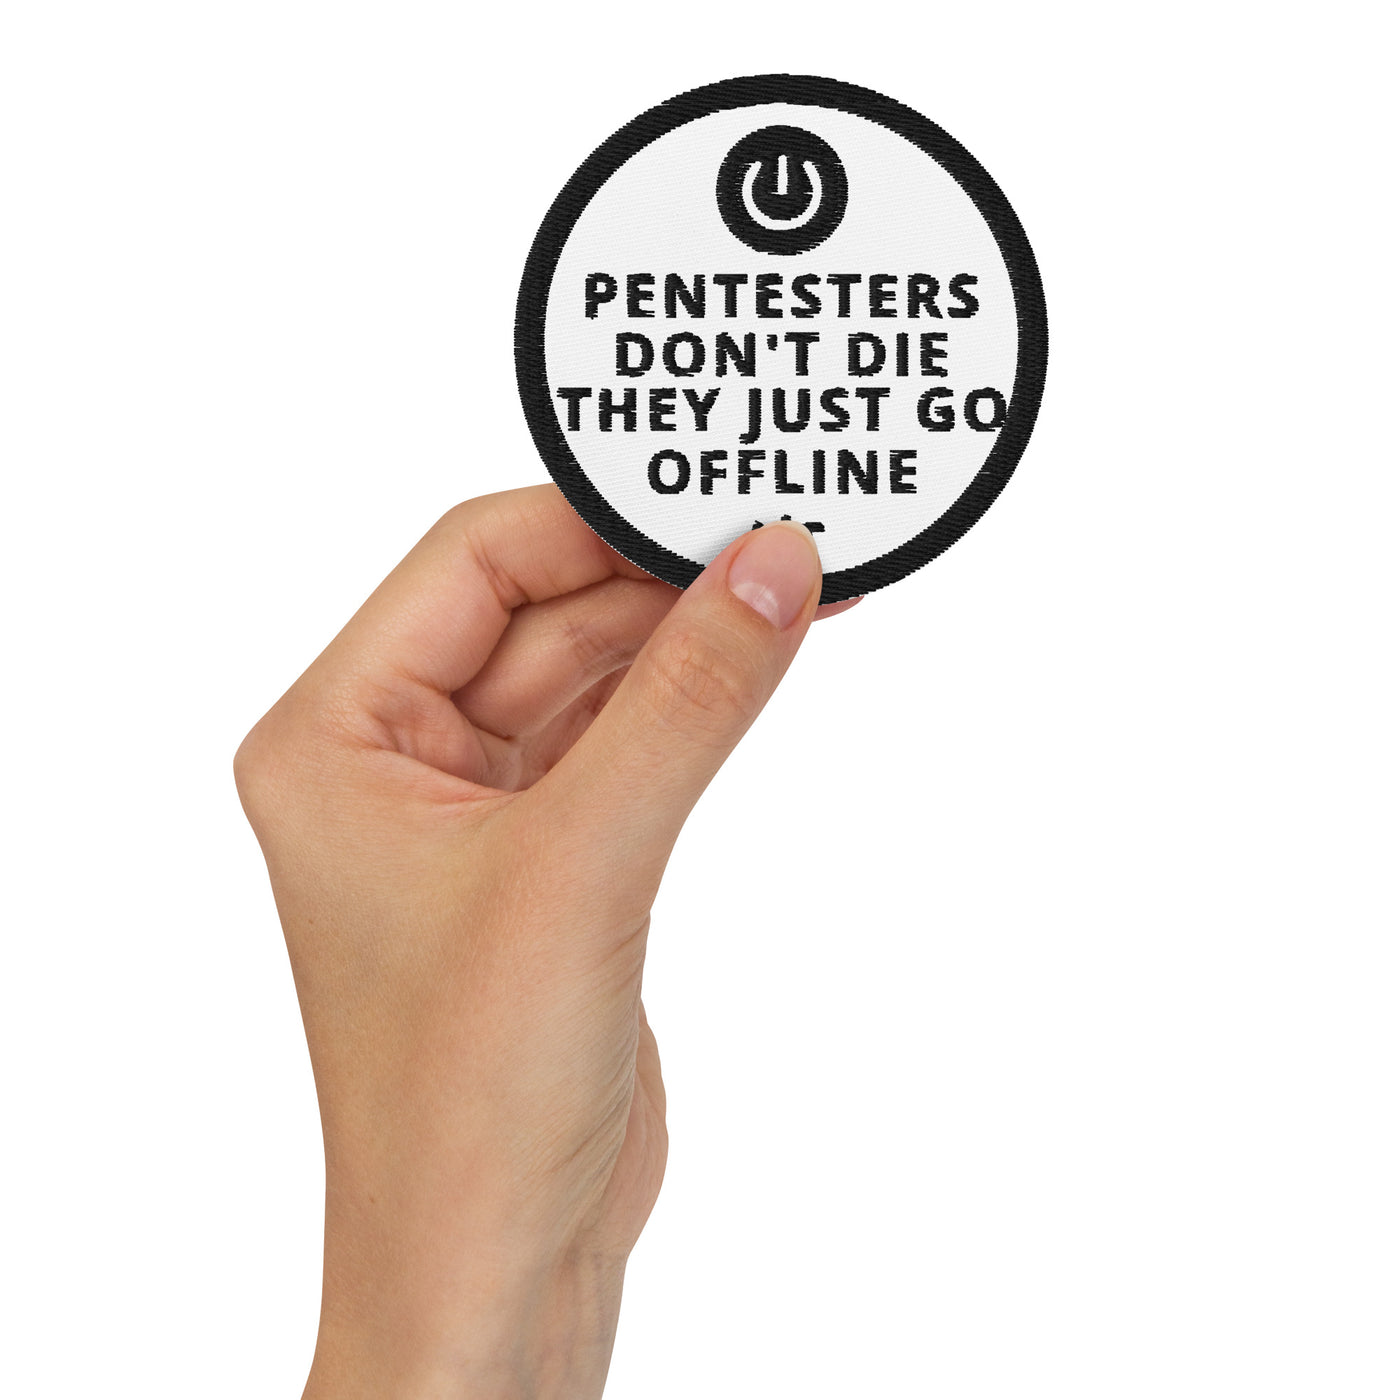 Pentesters don’t die they just go offline - Embroidered patches